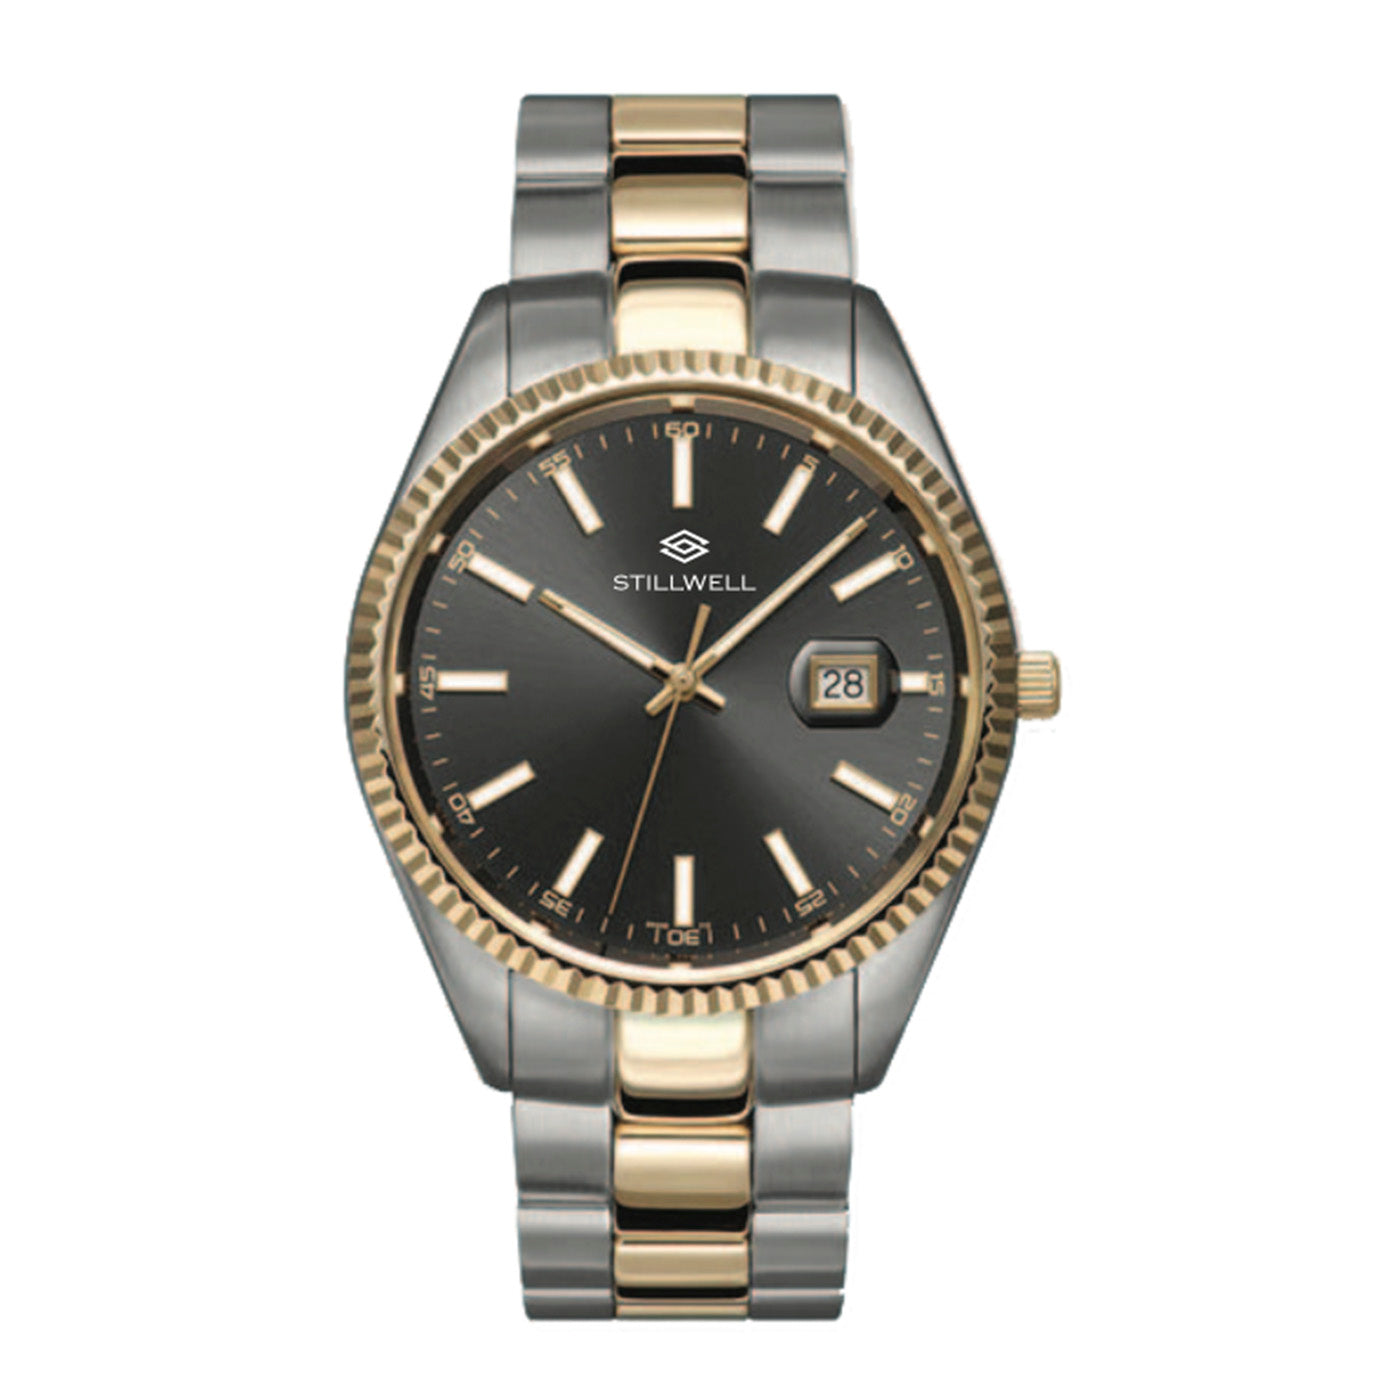 Stillwell Gold and Silver Watch